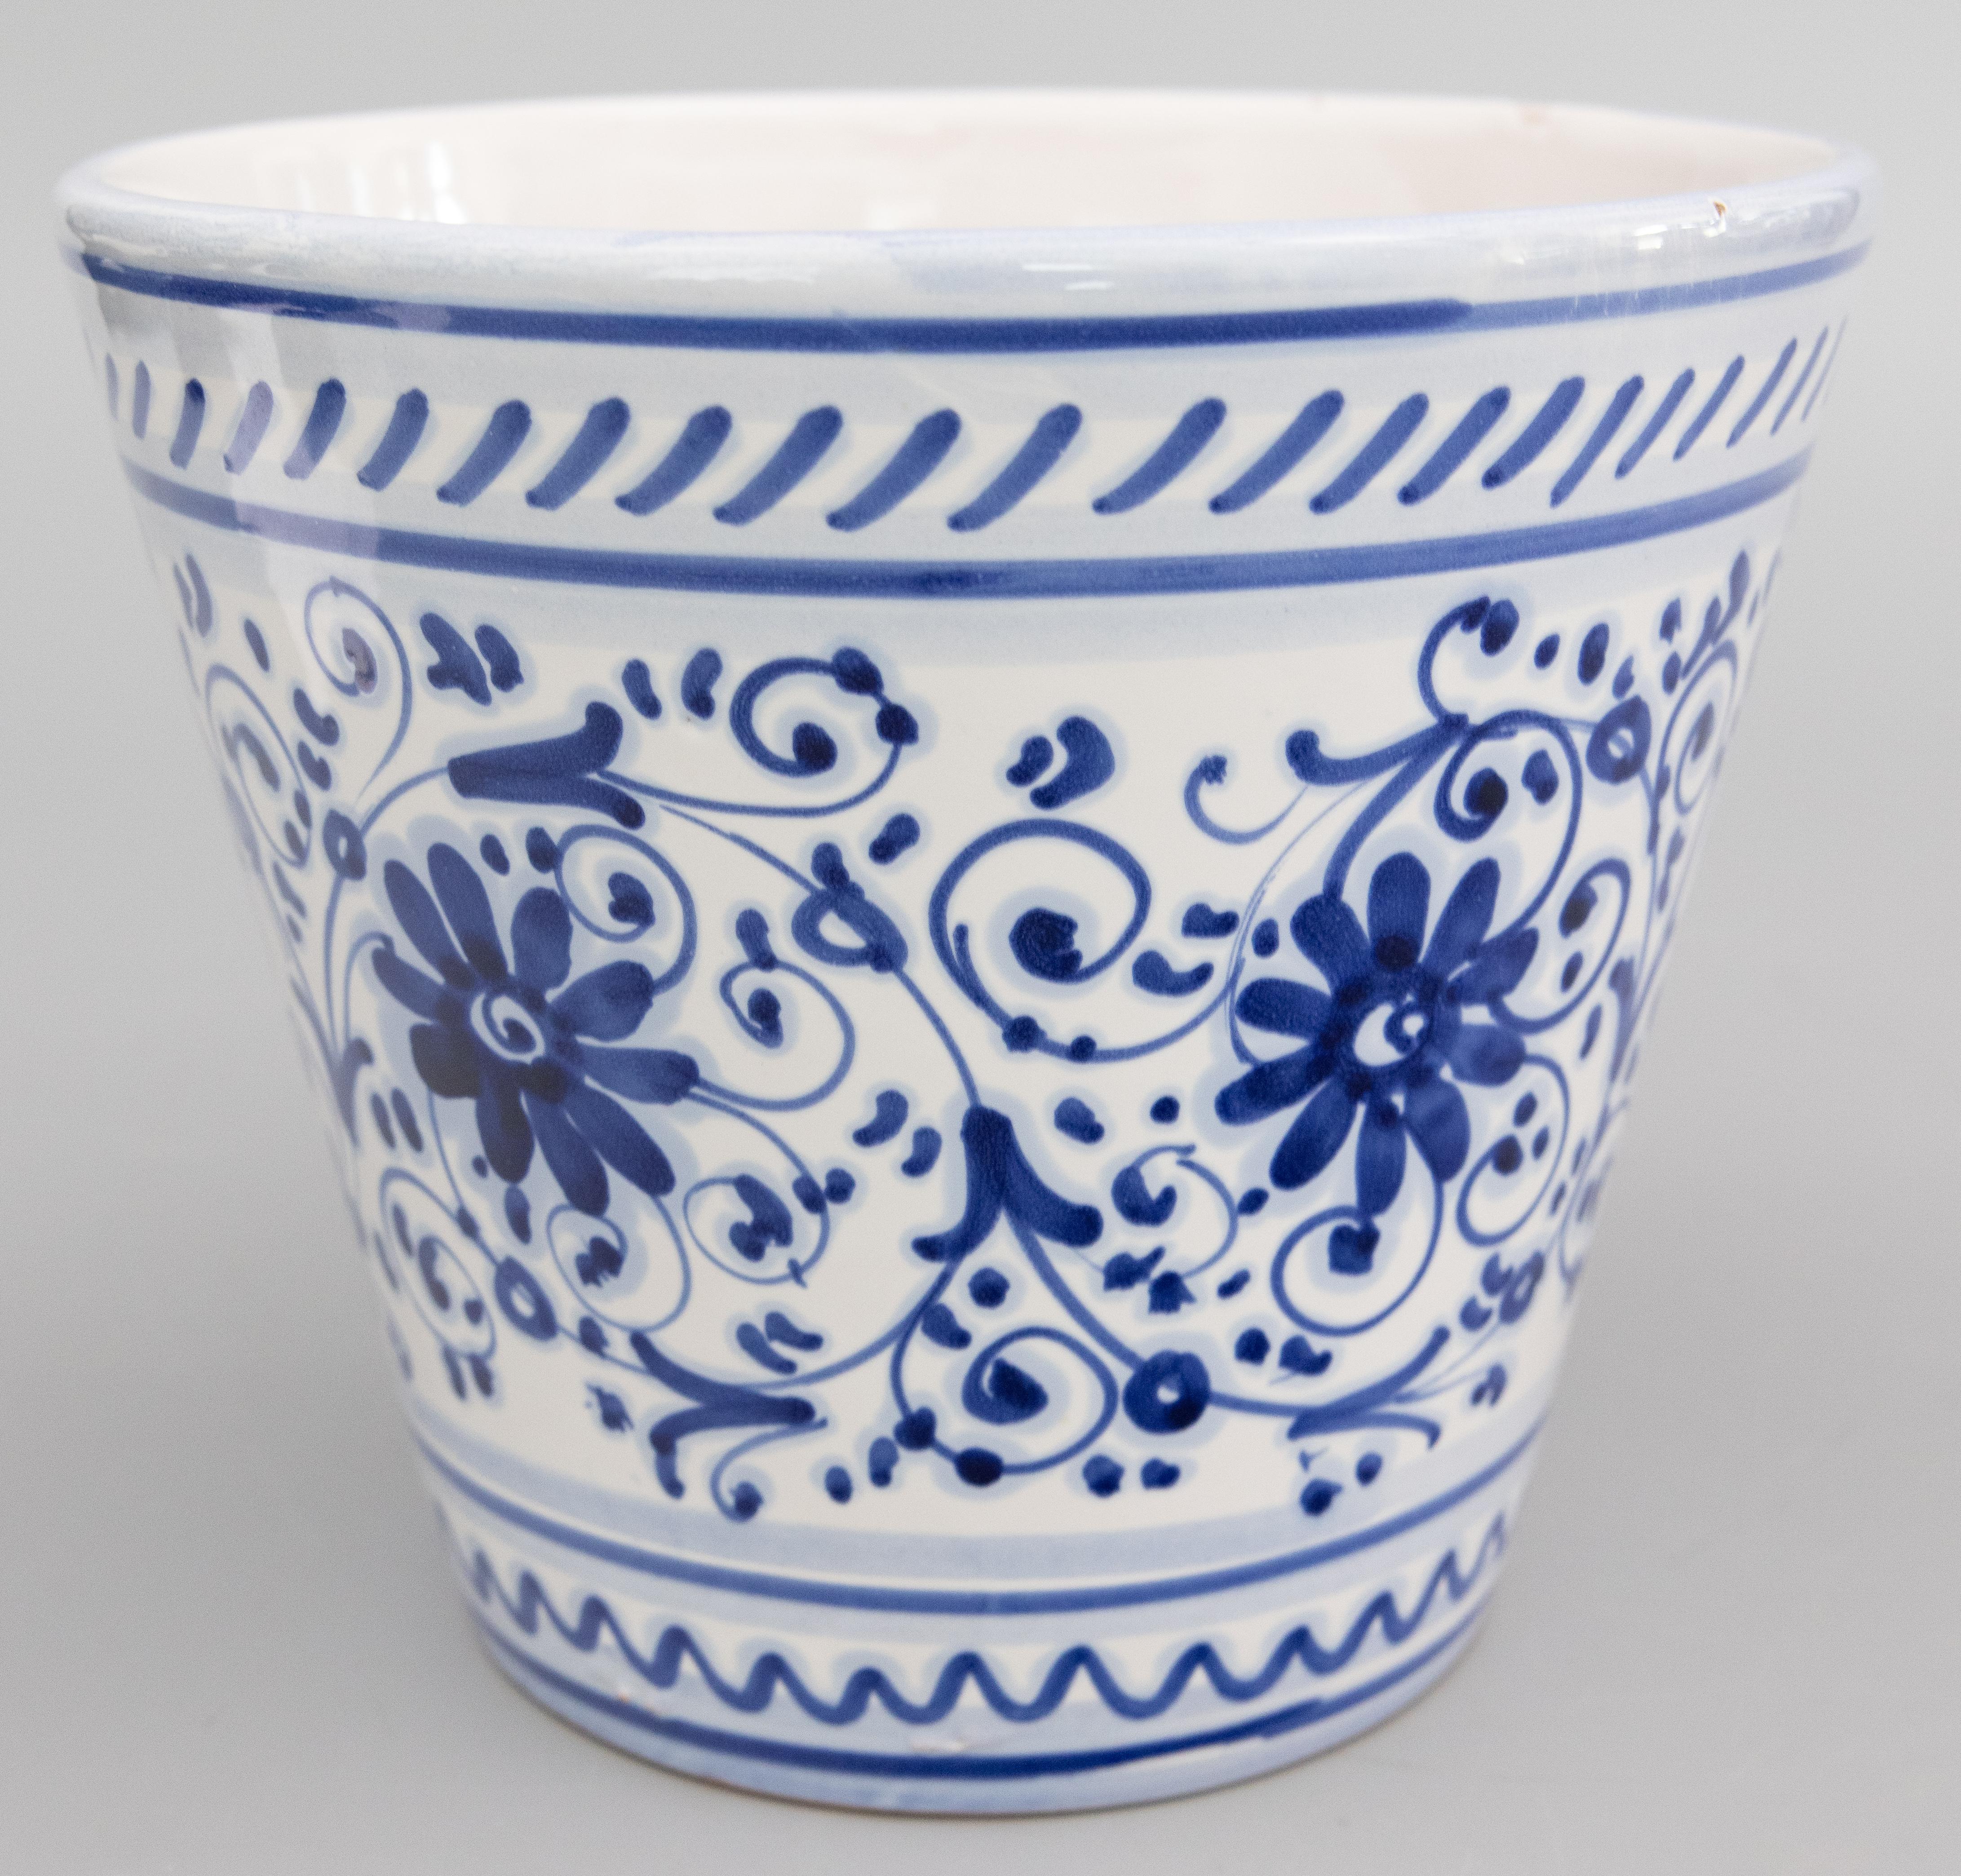 A lovely vintage Italian blue and white floral ceramic planter / jardiniere / cachepot / wine cooler. Marked 